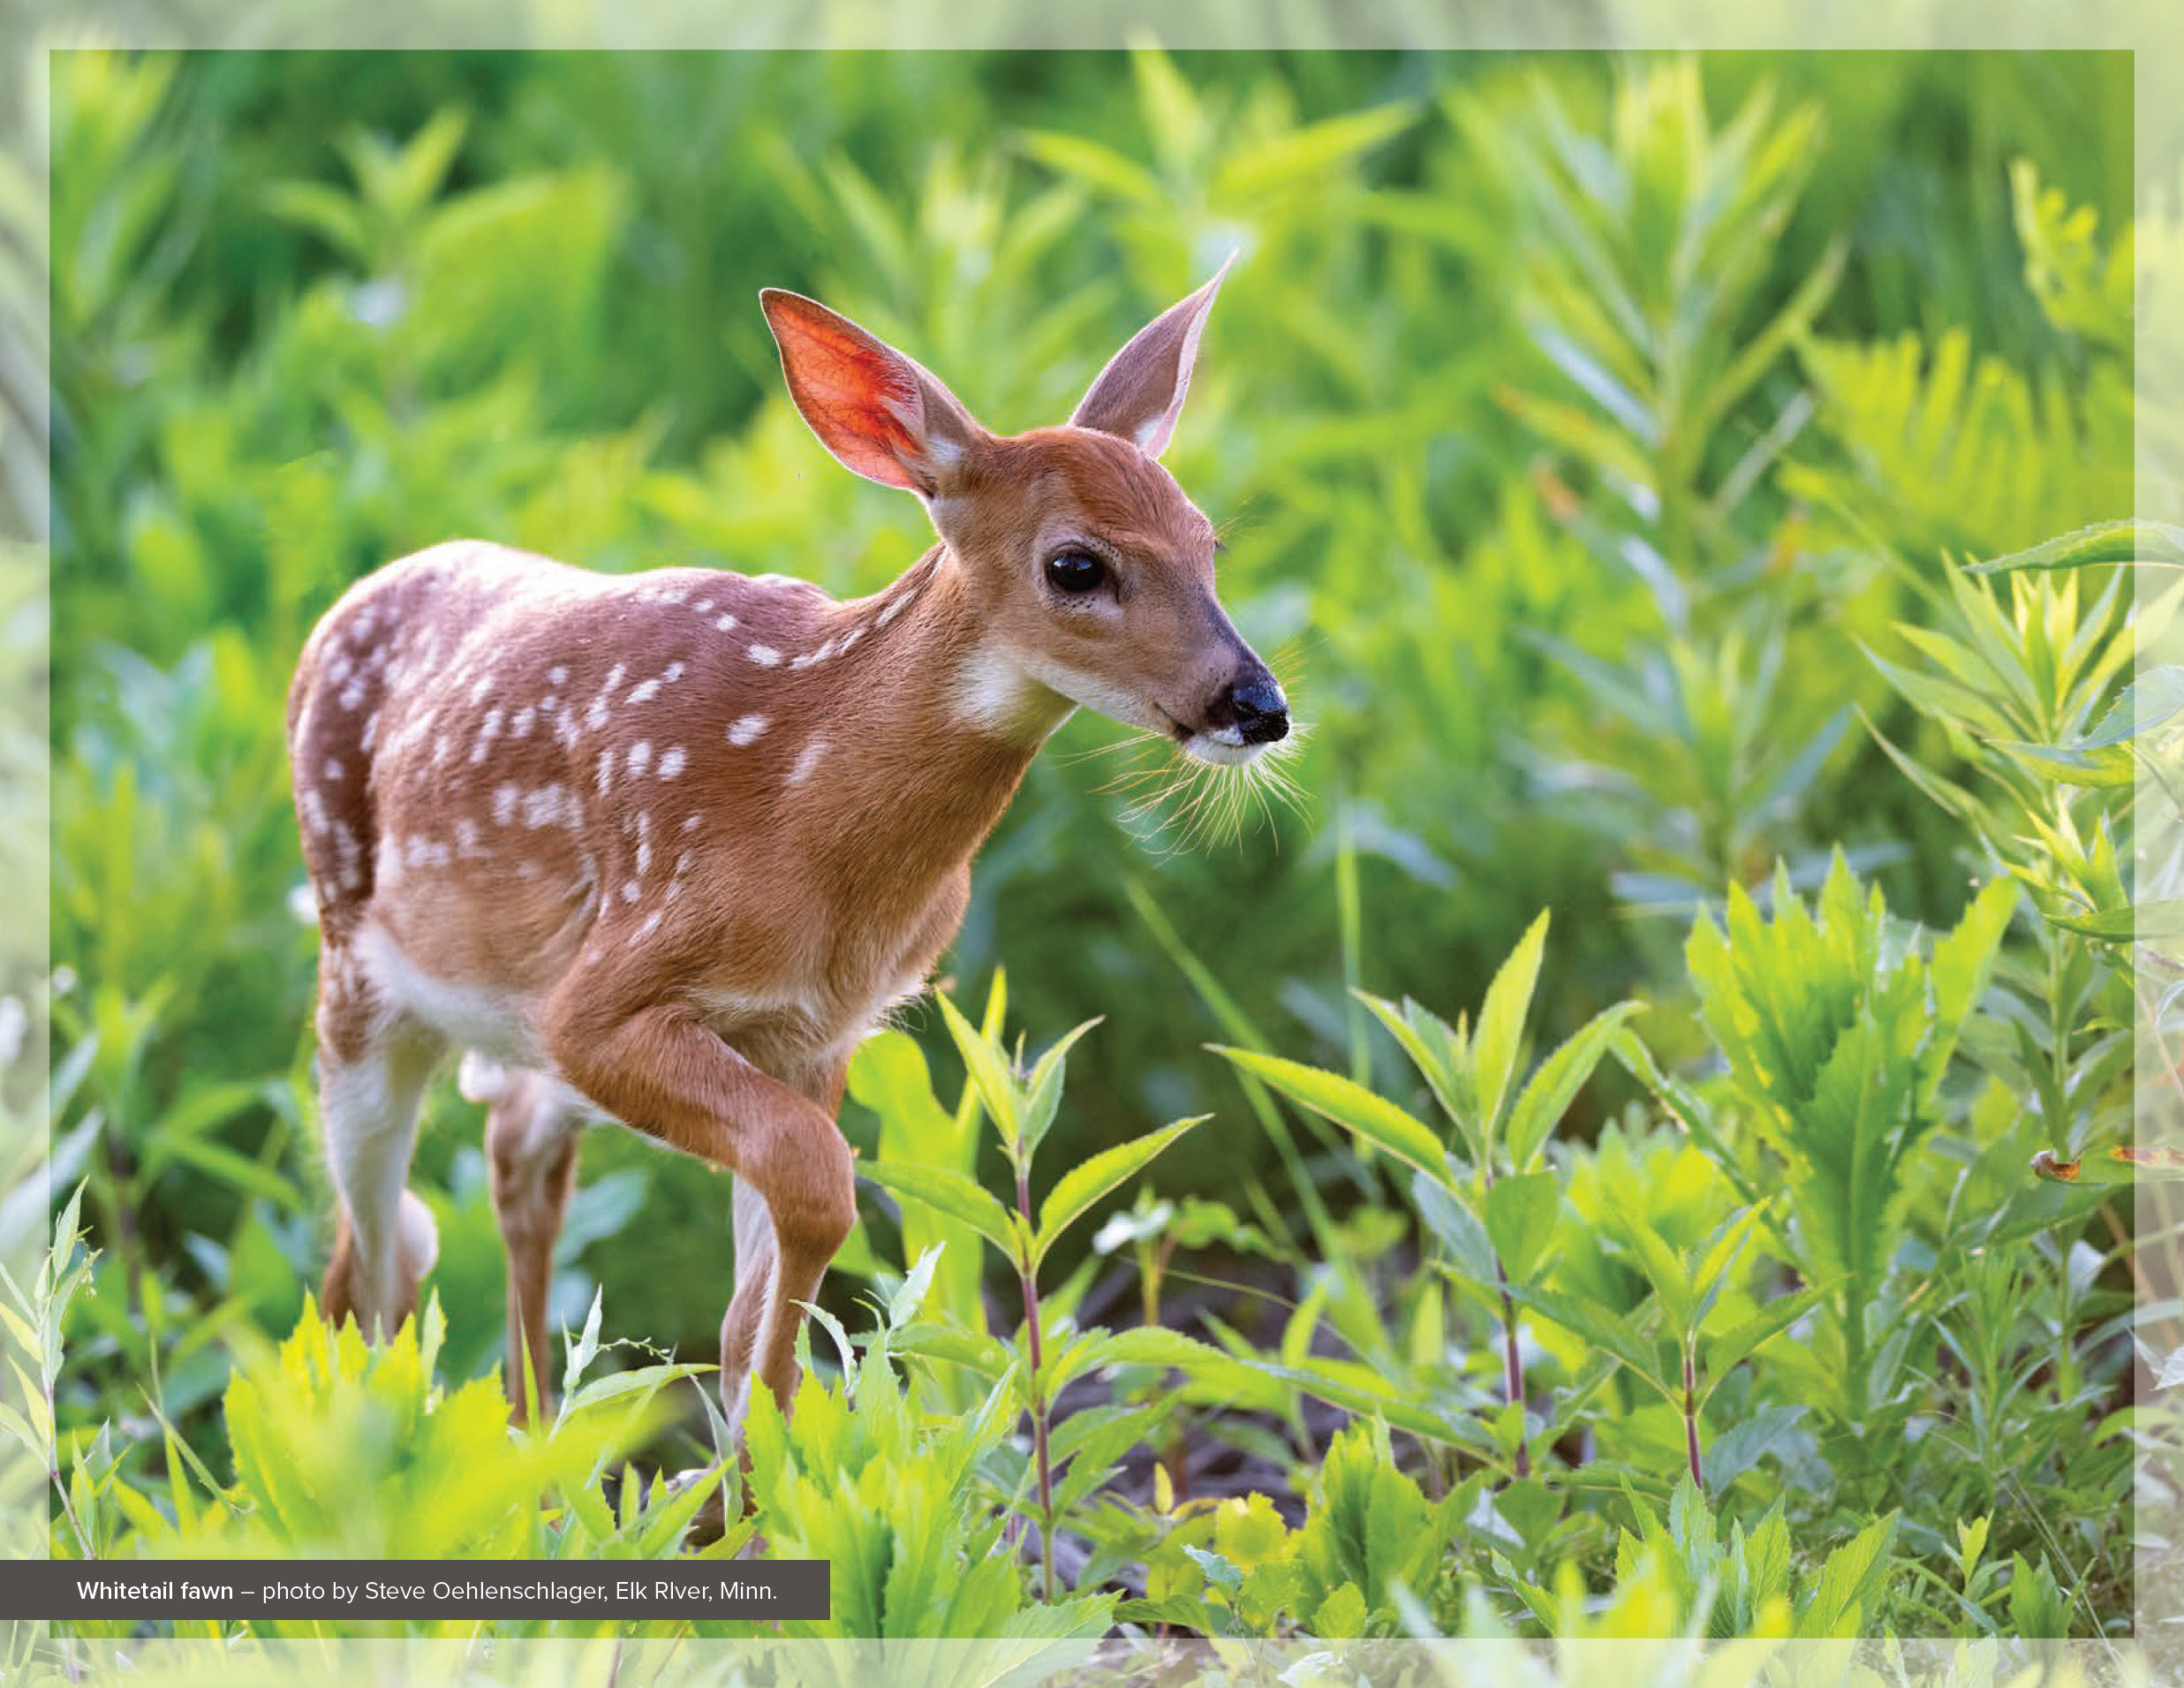 Whitetail fawn – photo by Steve Oehlenschlager, Elk RIver, Minn.